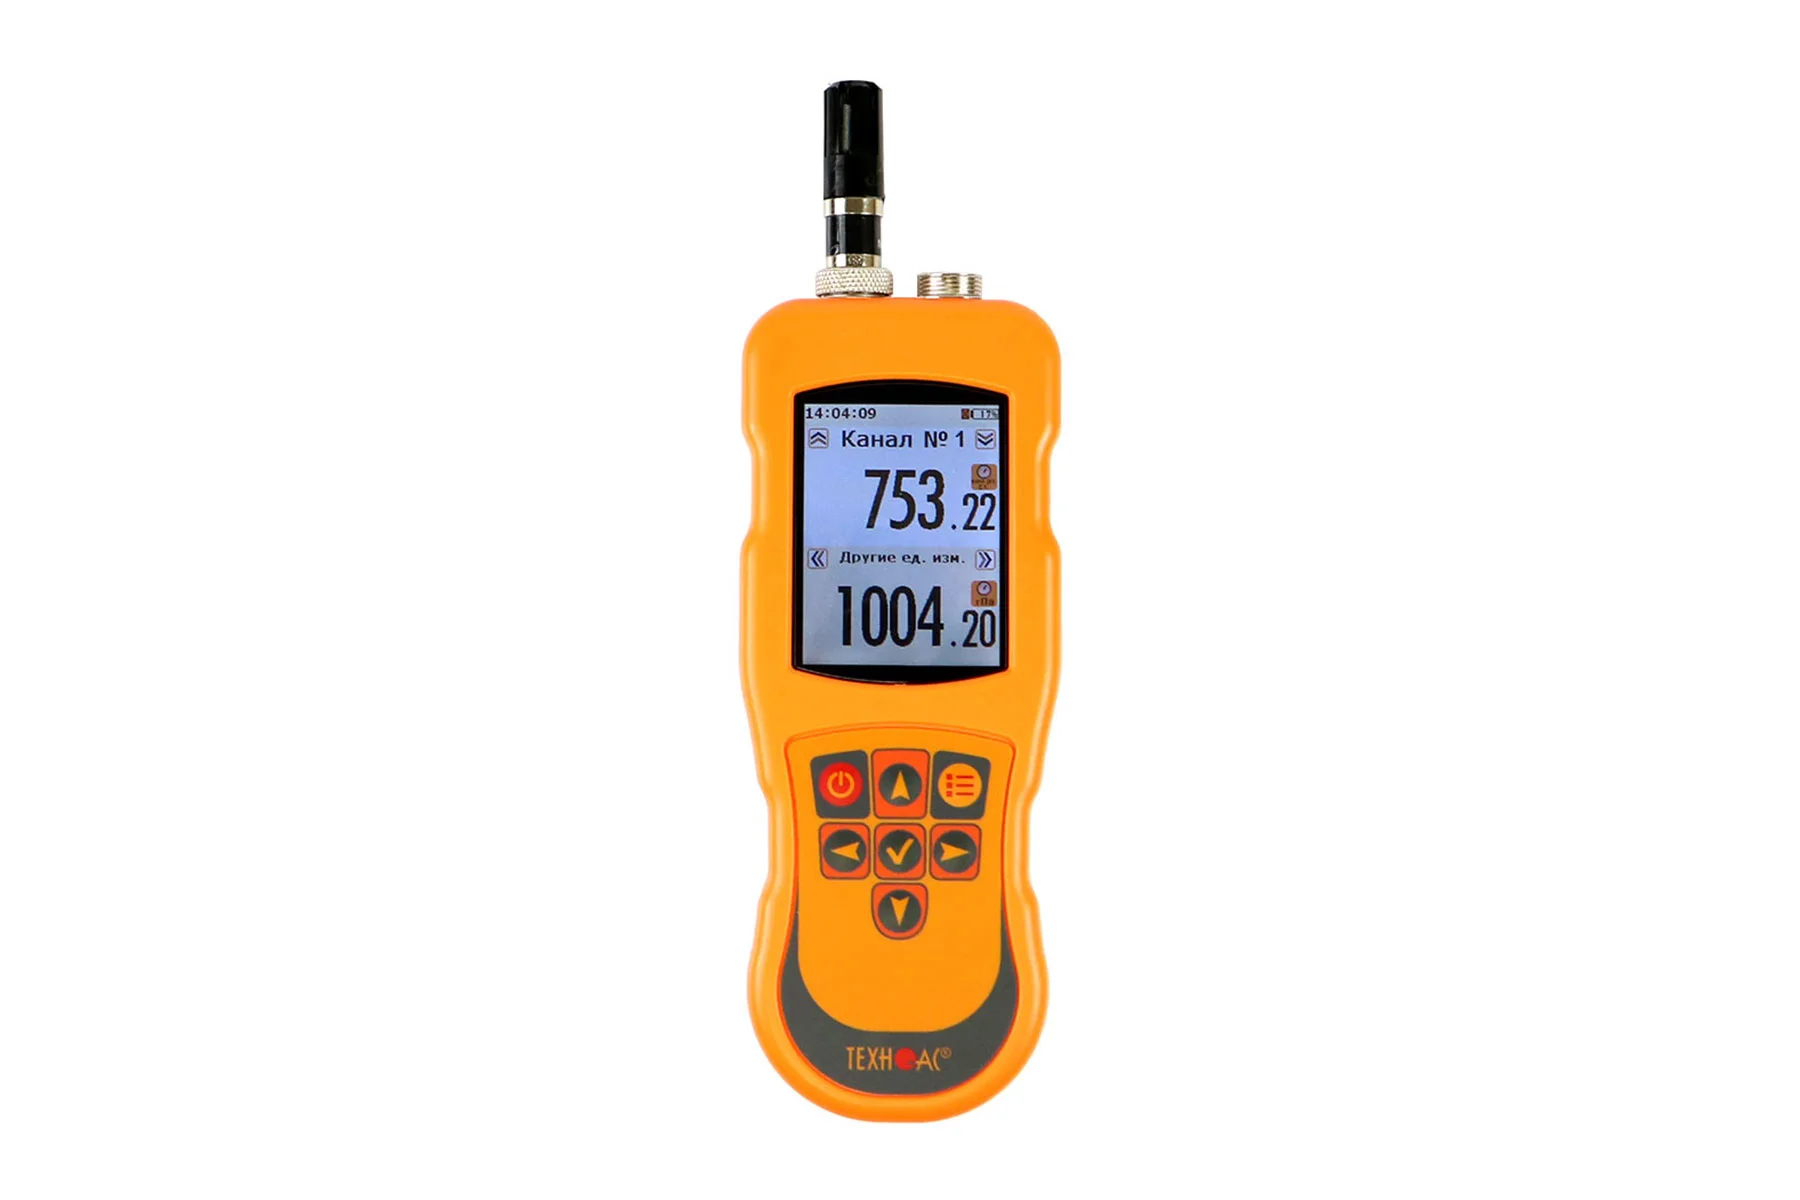 https://www.technoac.com/assets/images/products/digital-thermometers/dt-529.webp